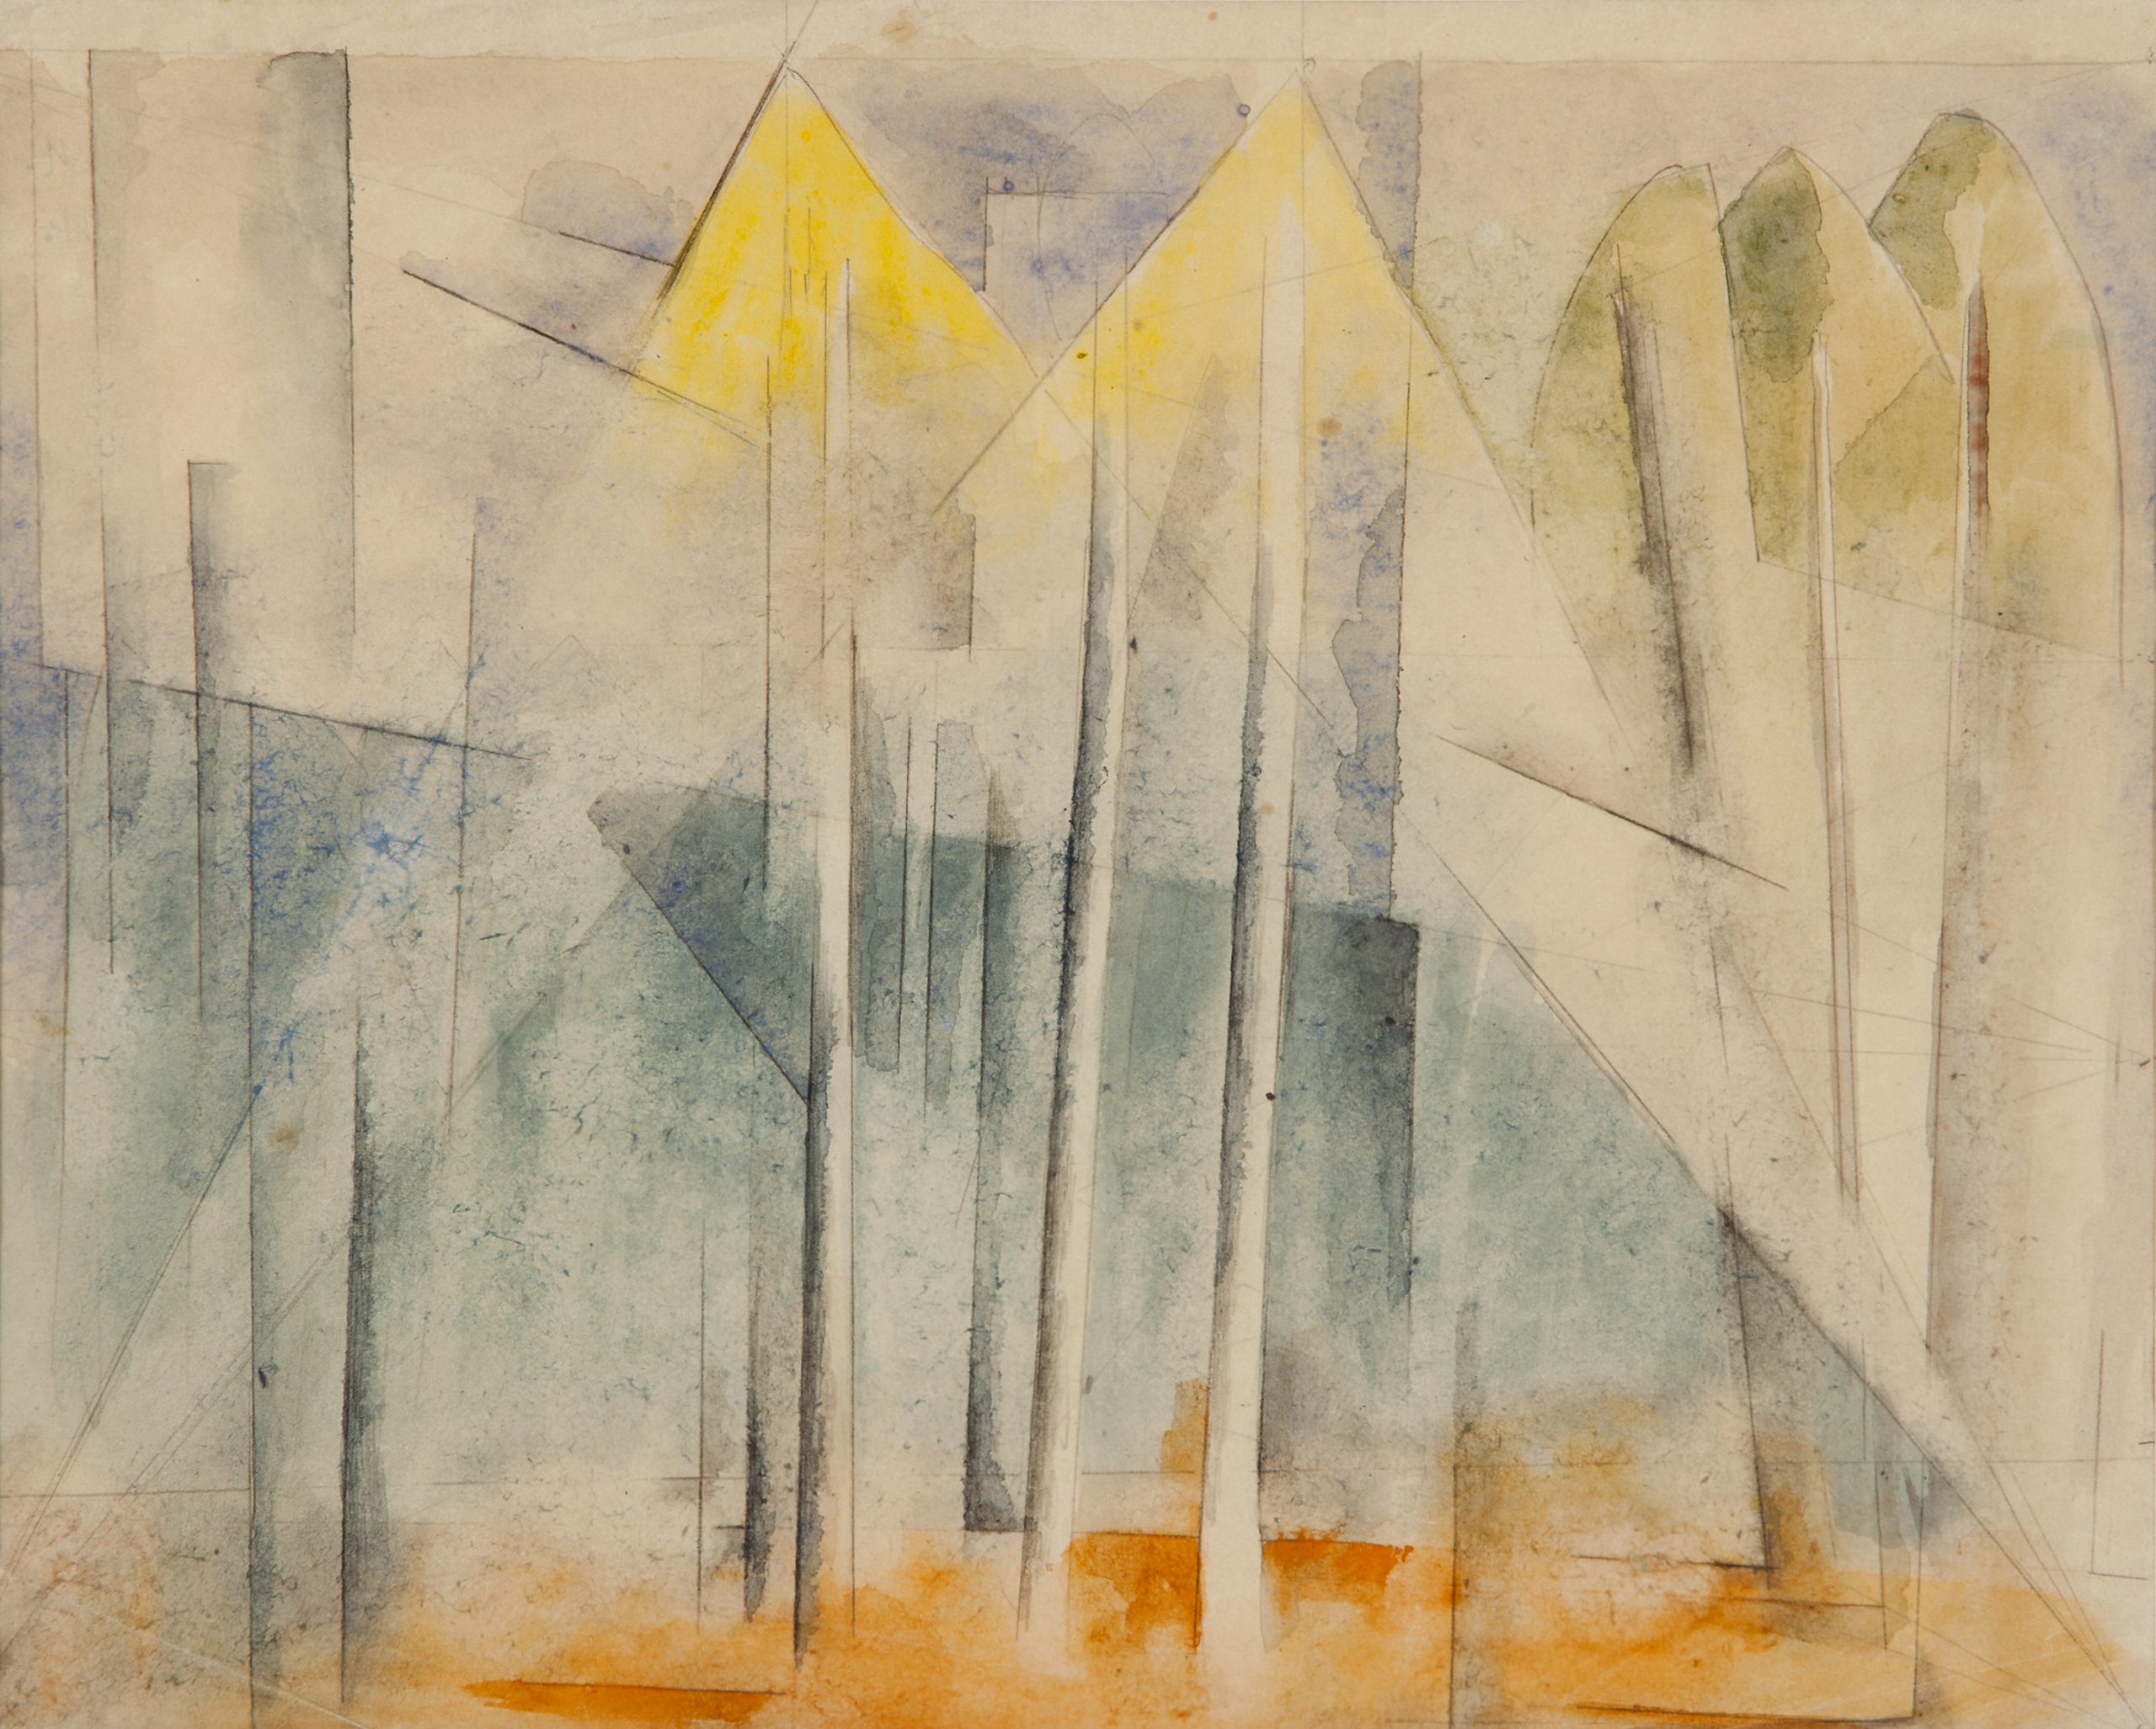 an abstract australian painting with triangular tree forms and yellow peaks